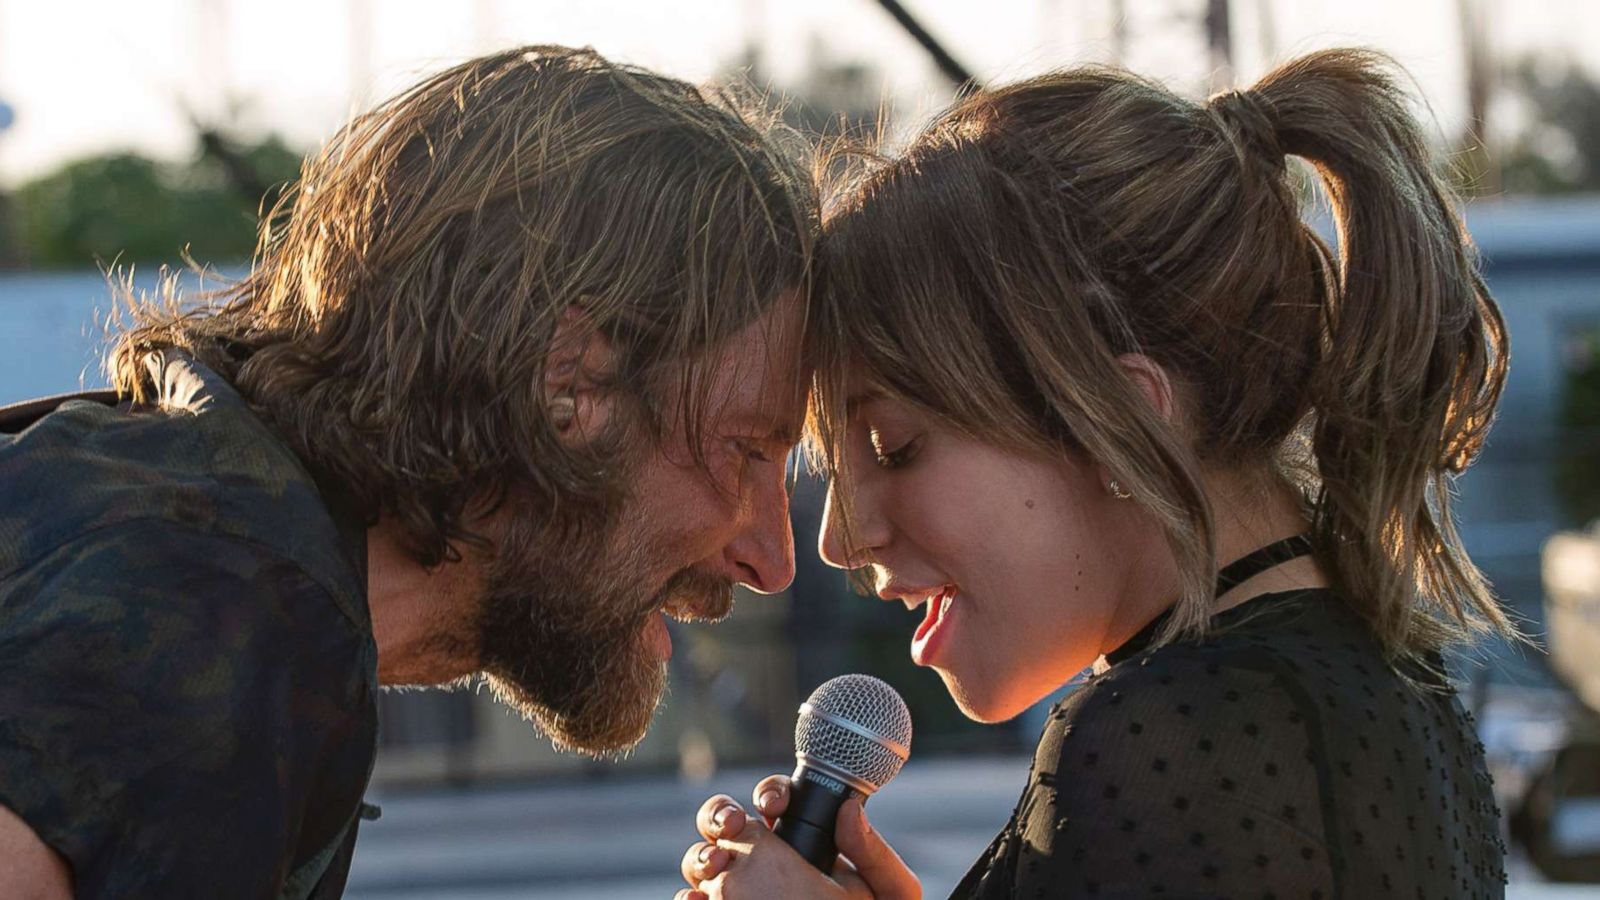 PHOTO: Bradley Cooper and Lady Gaga in the drama "A Star is Born," from Warner Bros. Pictures.